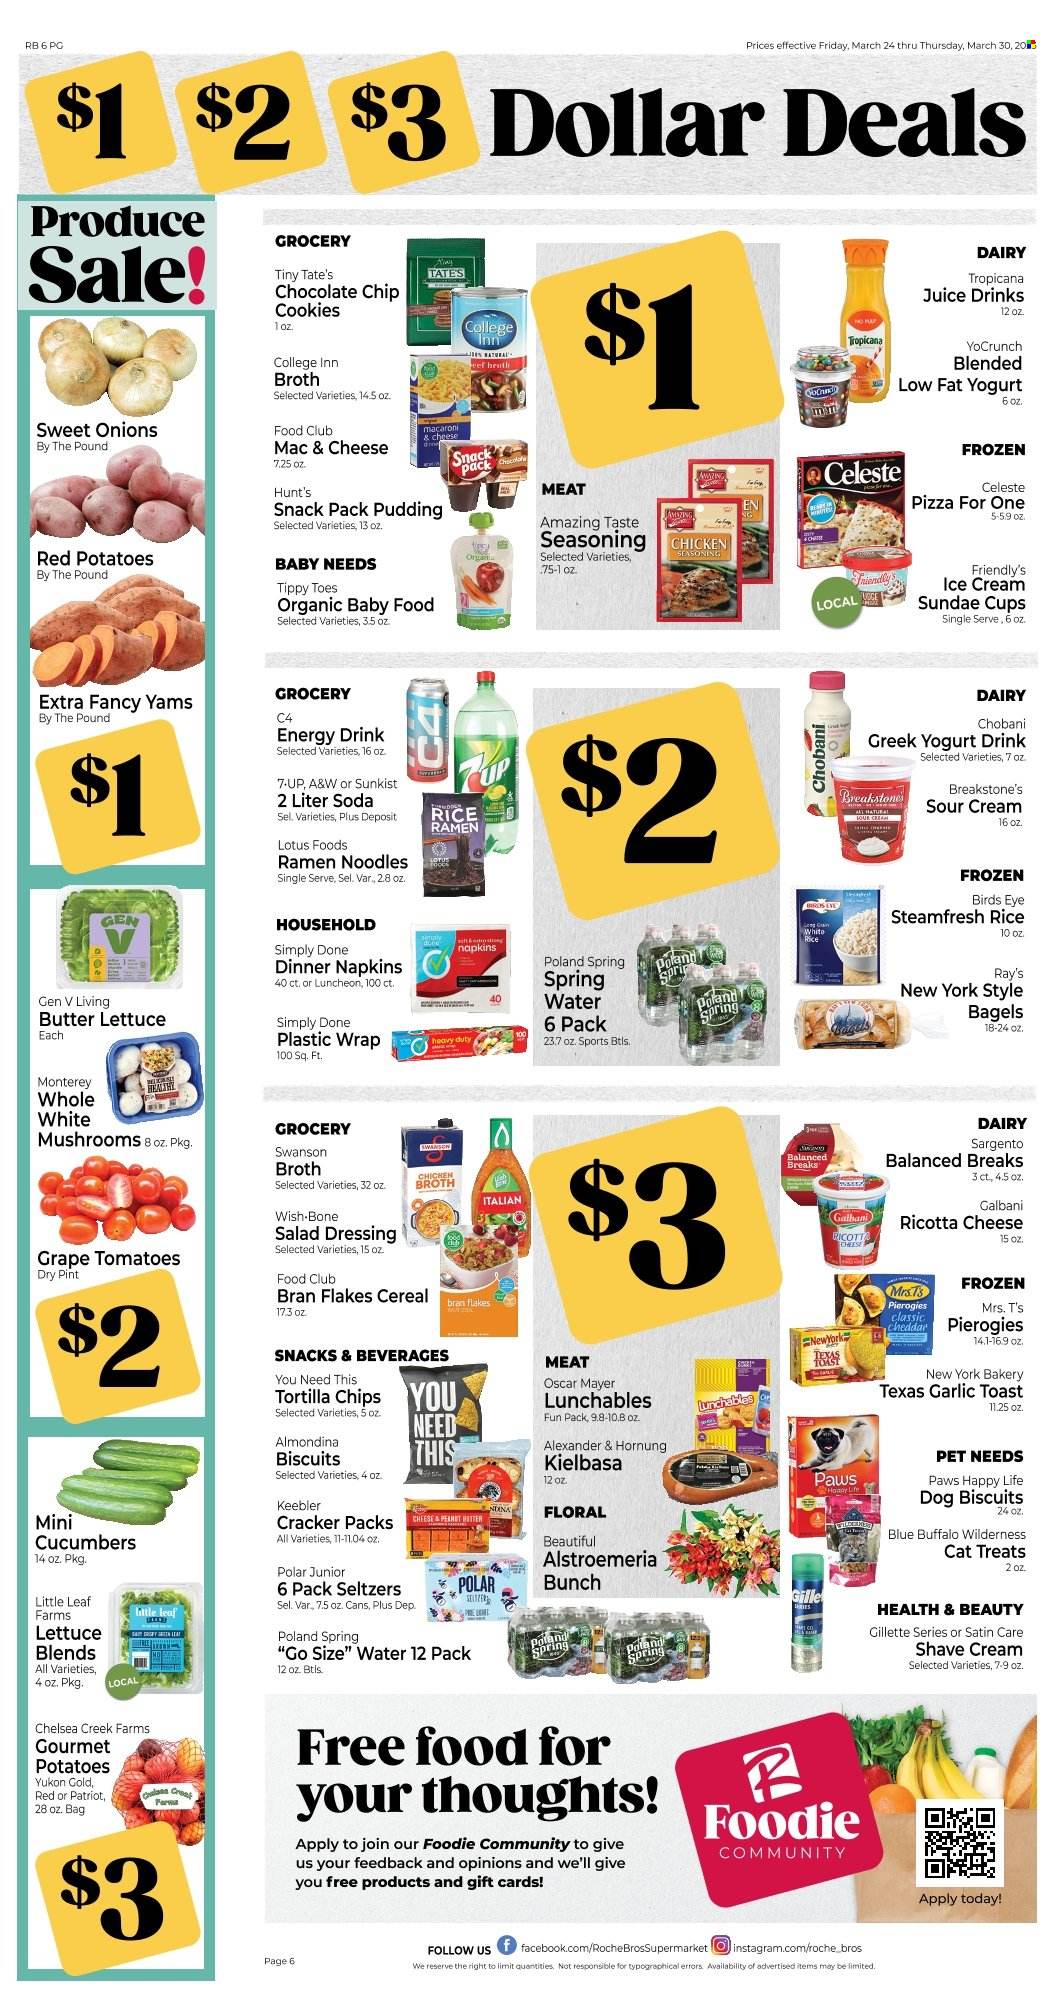 thumbnail - Roche Bros. Flyer - 03/24/2023 - 03/30/2023 - Sales products - mushrooms, bagels, butter lettuce, cucumber, potatoes, lettuce, red potatoes, ramen, pizza, macaroni, Bird's Eye, noodles, Lunchables, Oscar Mayer, sausage, kielbasa, lunch meat, ricotta, Galbani, Sargento, greek yoghurt, pudding, yoghurt, Chobani, yoghurt drink, sour cream, ice cream, Friendly's Ice Cream, Celeste, cookies, chocolate chips, crackers, Keebler, tortilla chips, broth, cereals, bran flakes, rice, spice, salad dressing, dressing, peanut butter, juice, energy drink, A&W, spring water, soda, water, red wine, wine, organic baby food, napkins, Gillette, shave cream, Lotus, Paws, animal treats, Blue Buffalo, dog food, dog biscuits, Alstroemeria. Page 6.